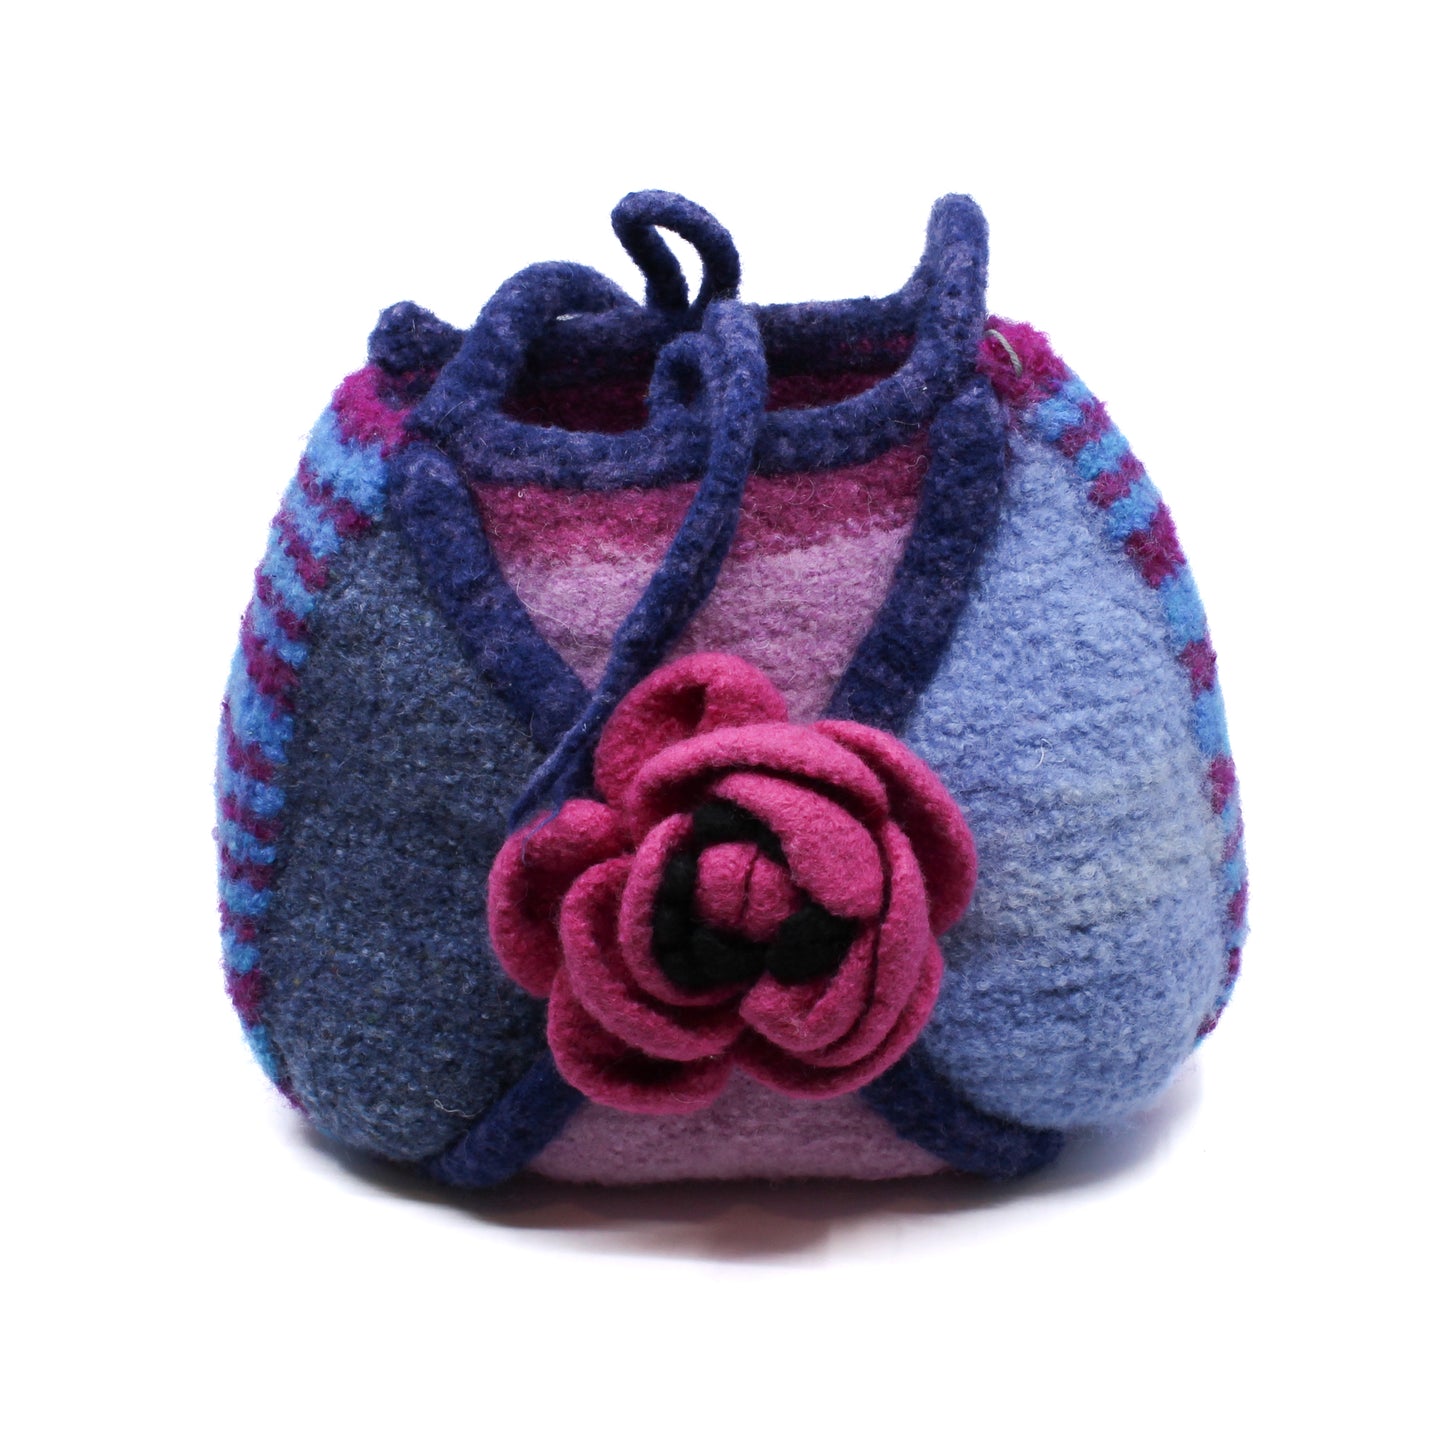 Indigo, purple, and pink felted bag with pink rose